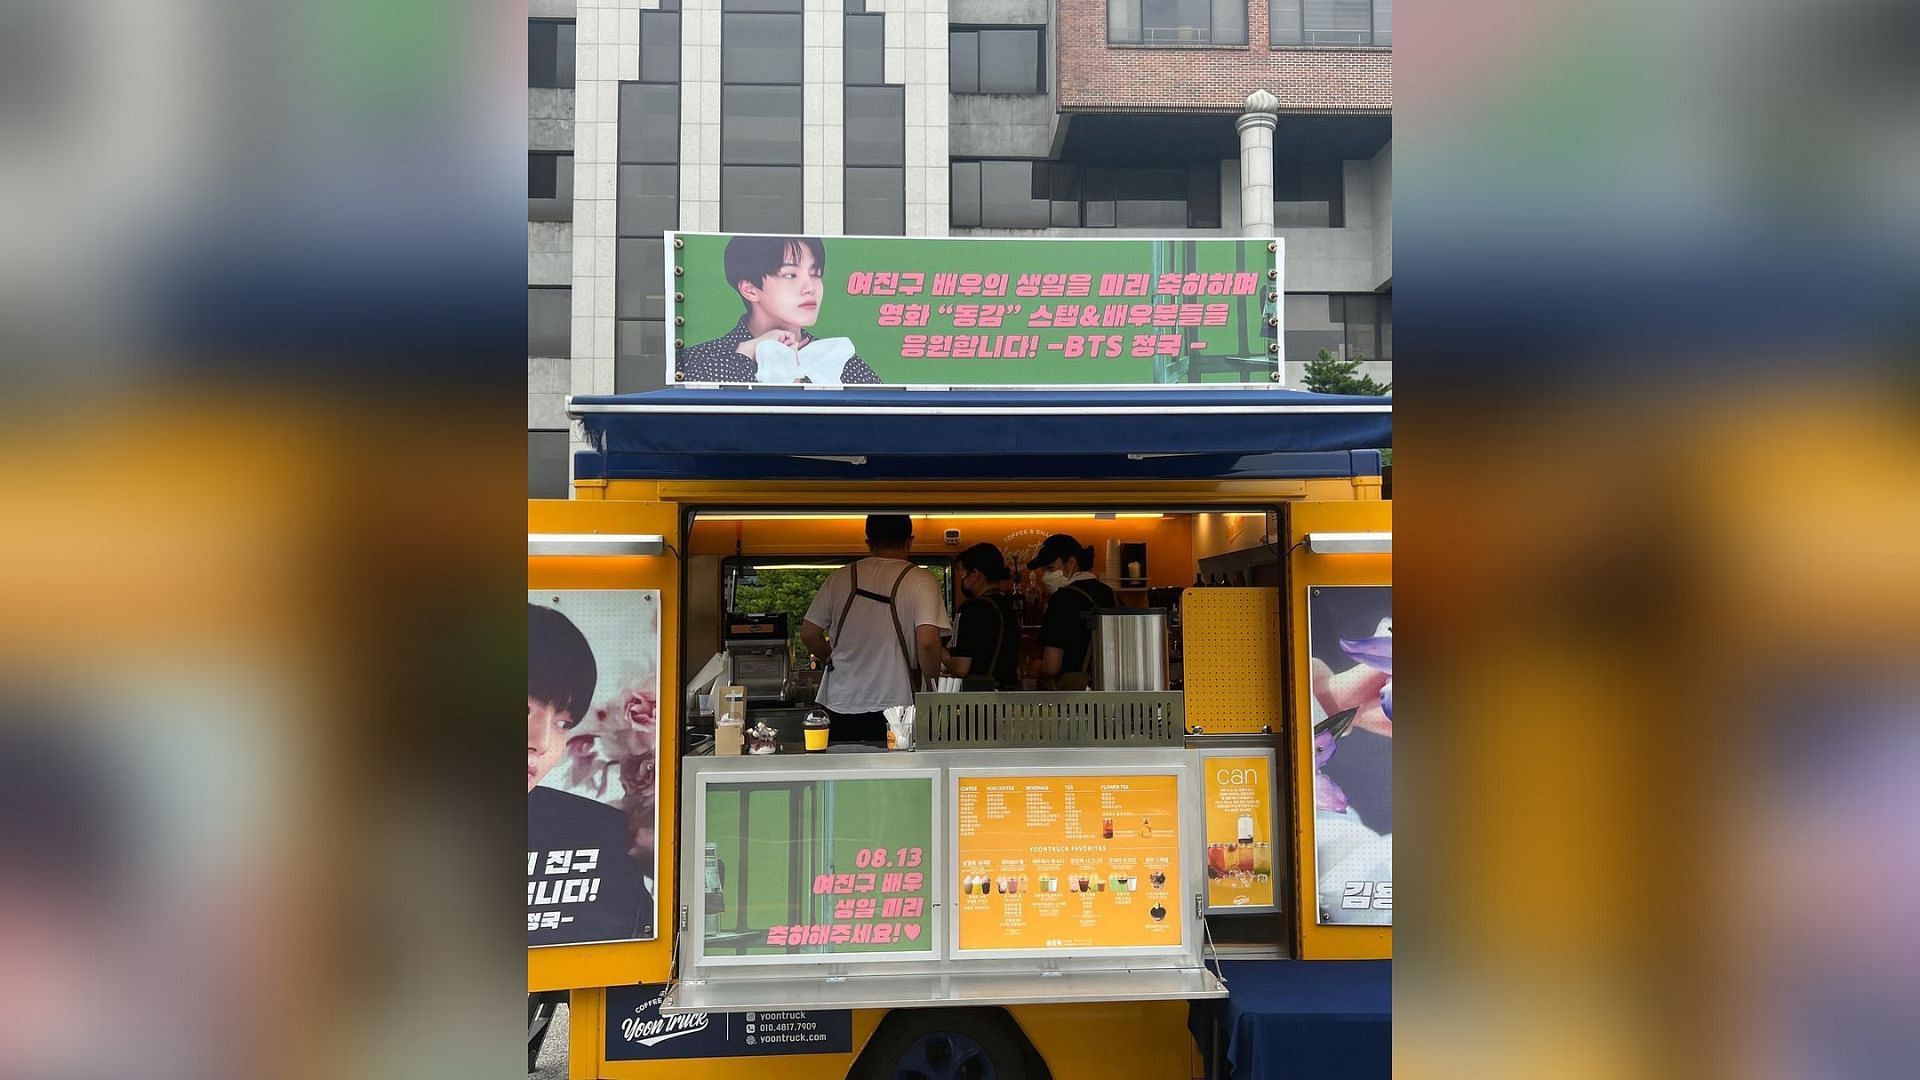 Birthday message on the top banner of the coffee truck (Image via Instagram/yeojin9oo)